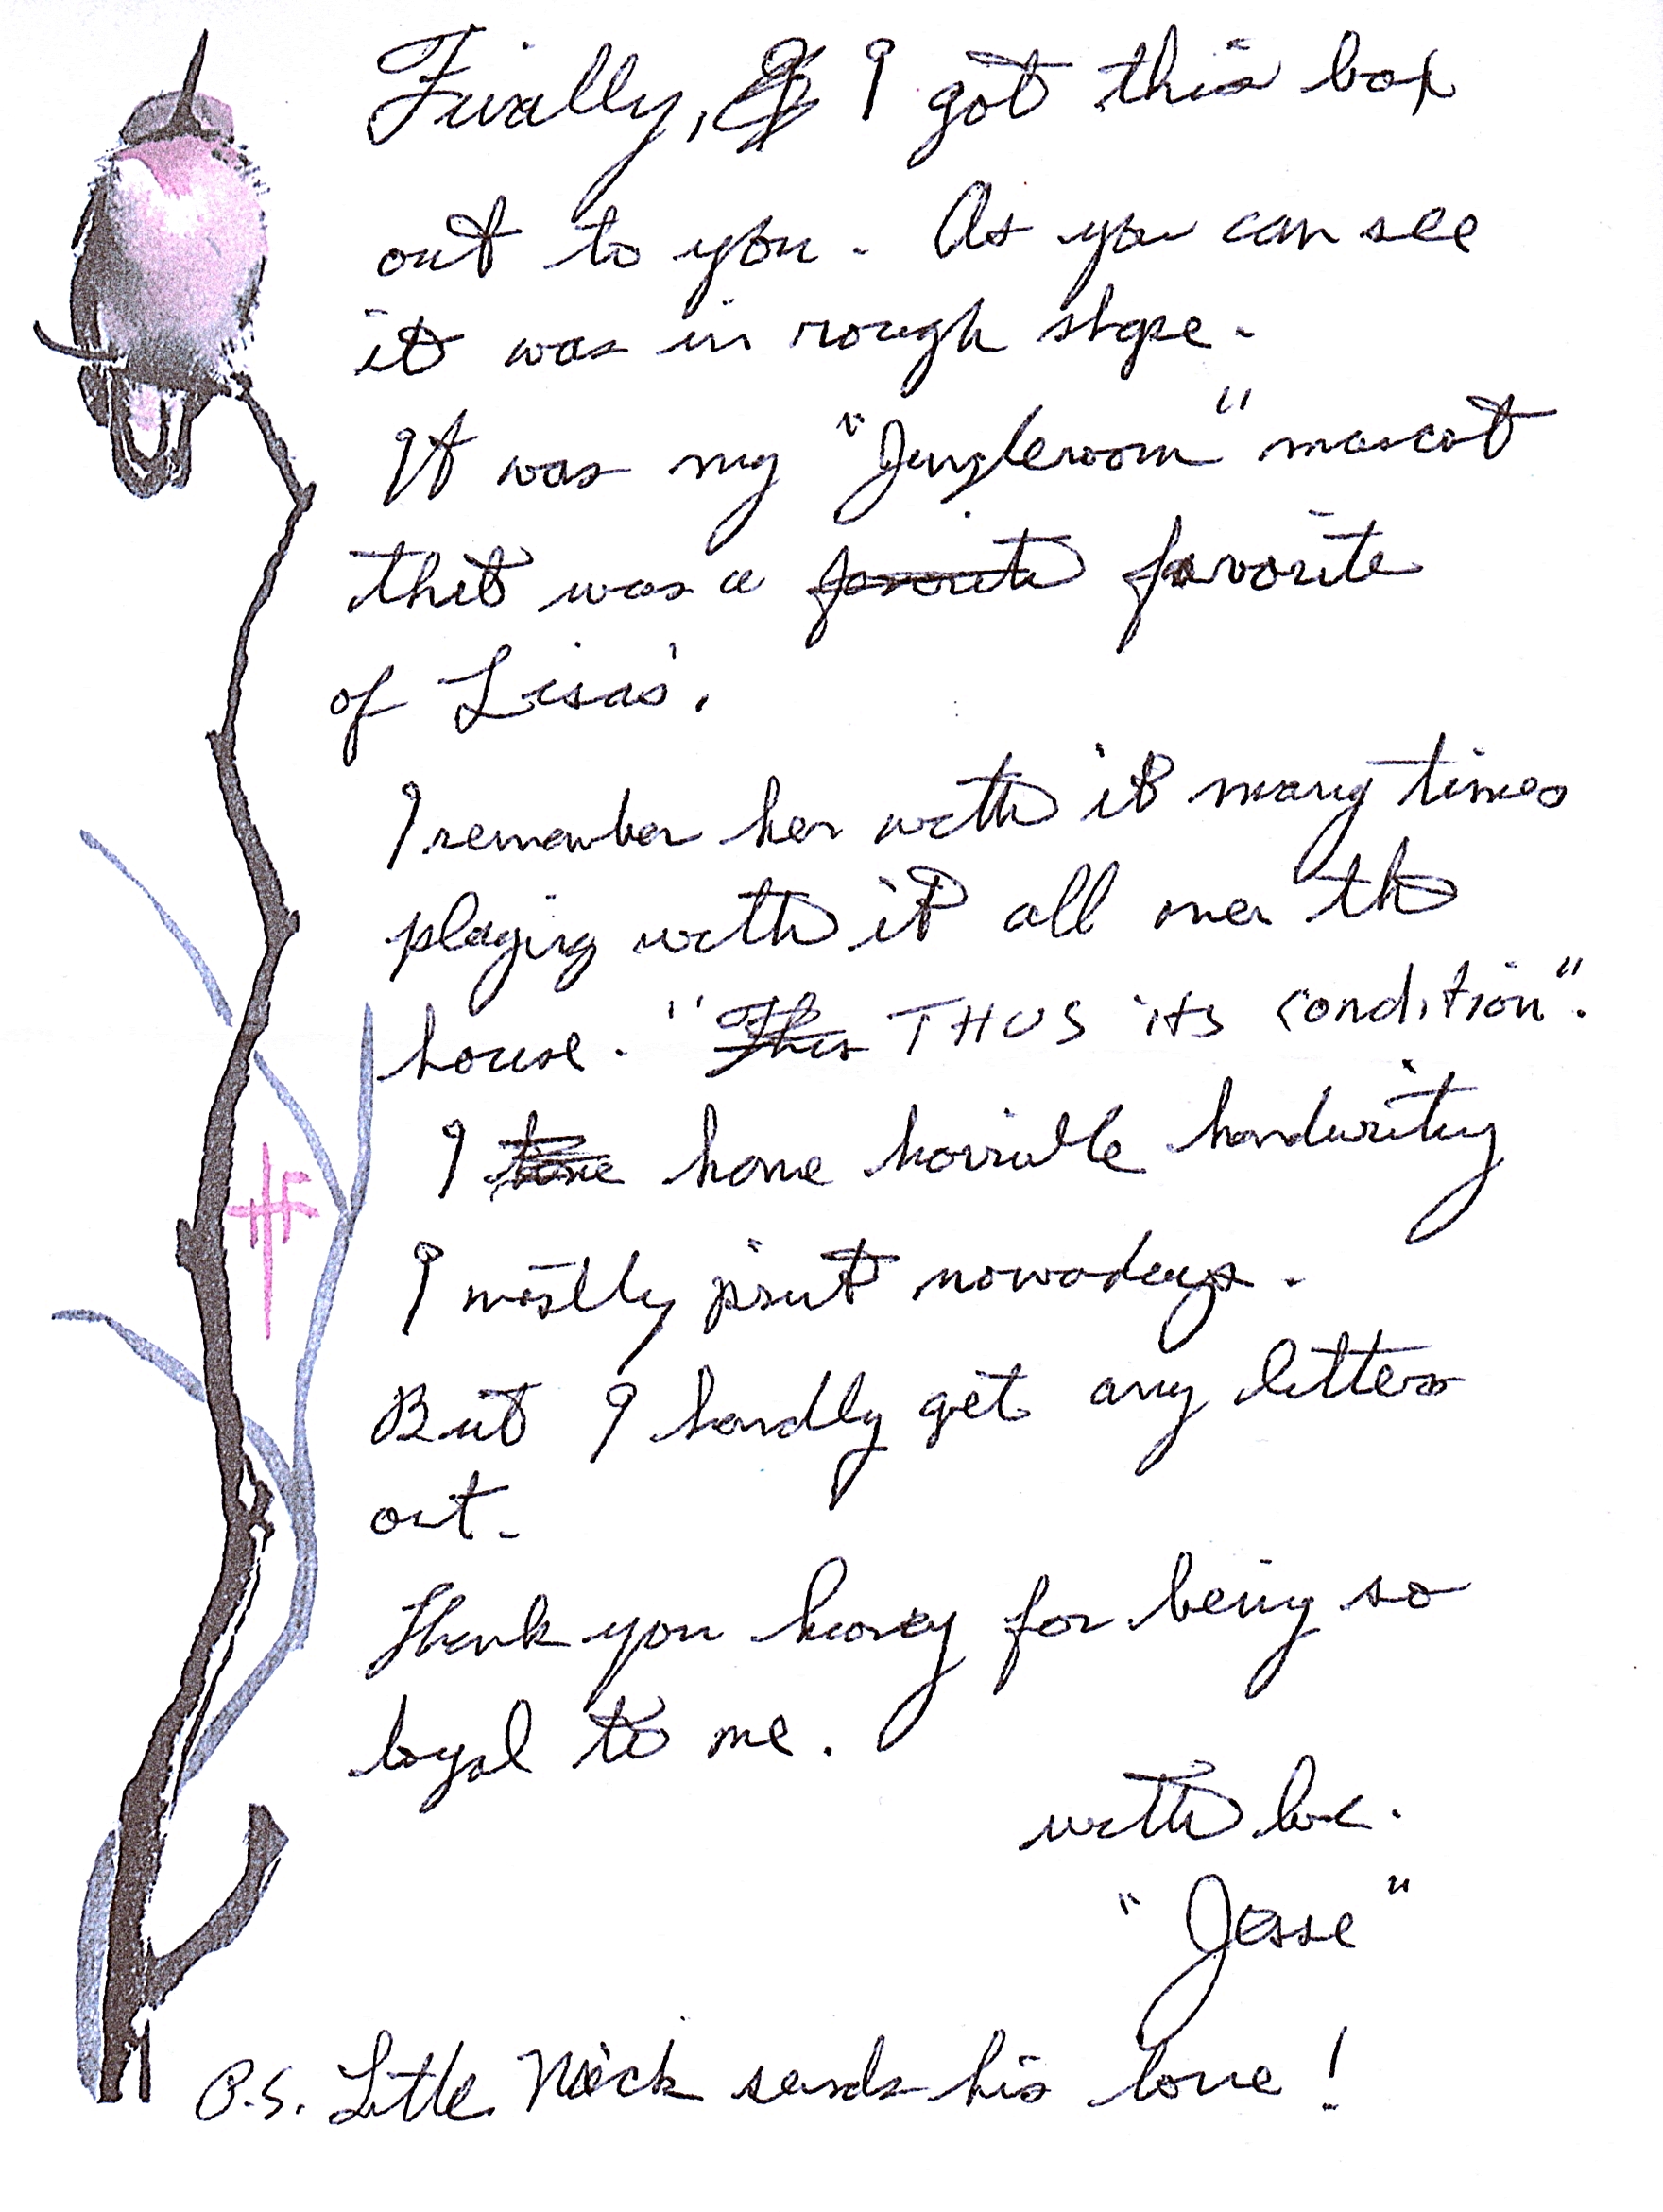 Jesse's letter which accompanied the tiger